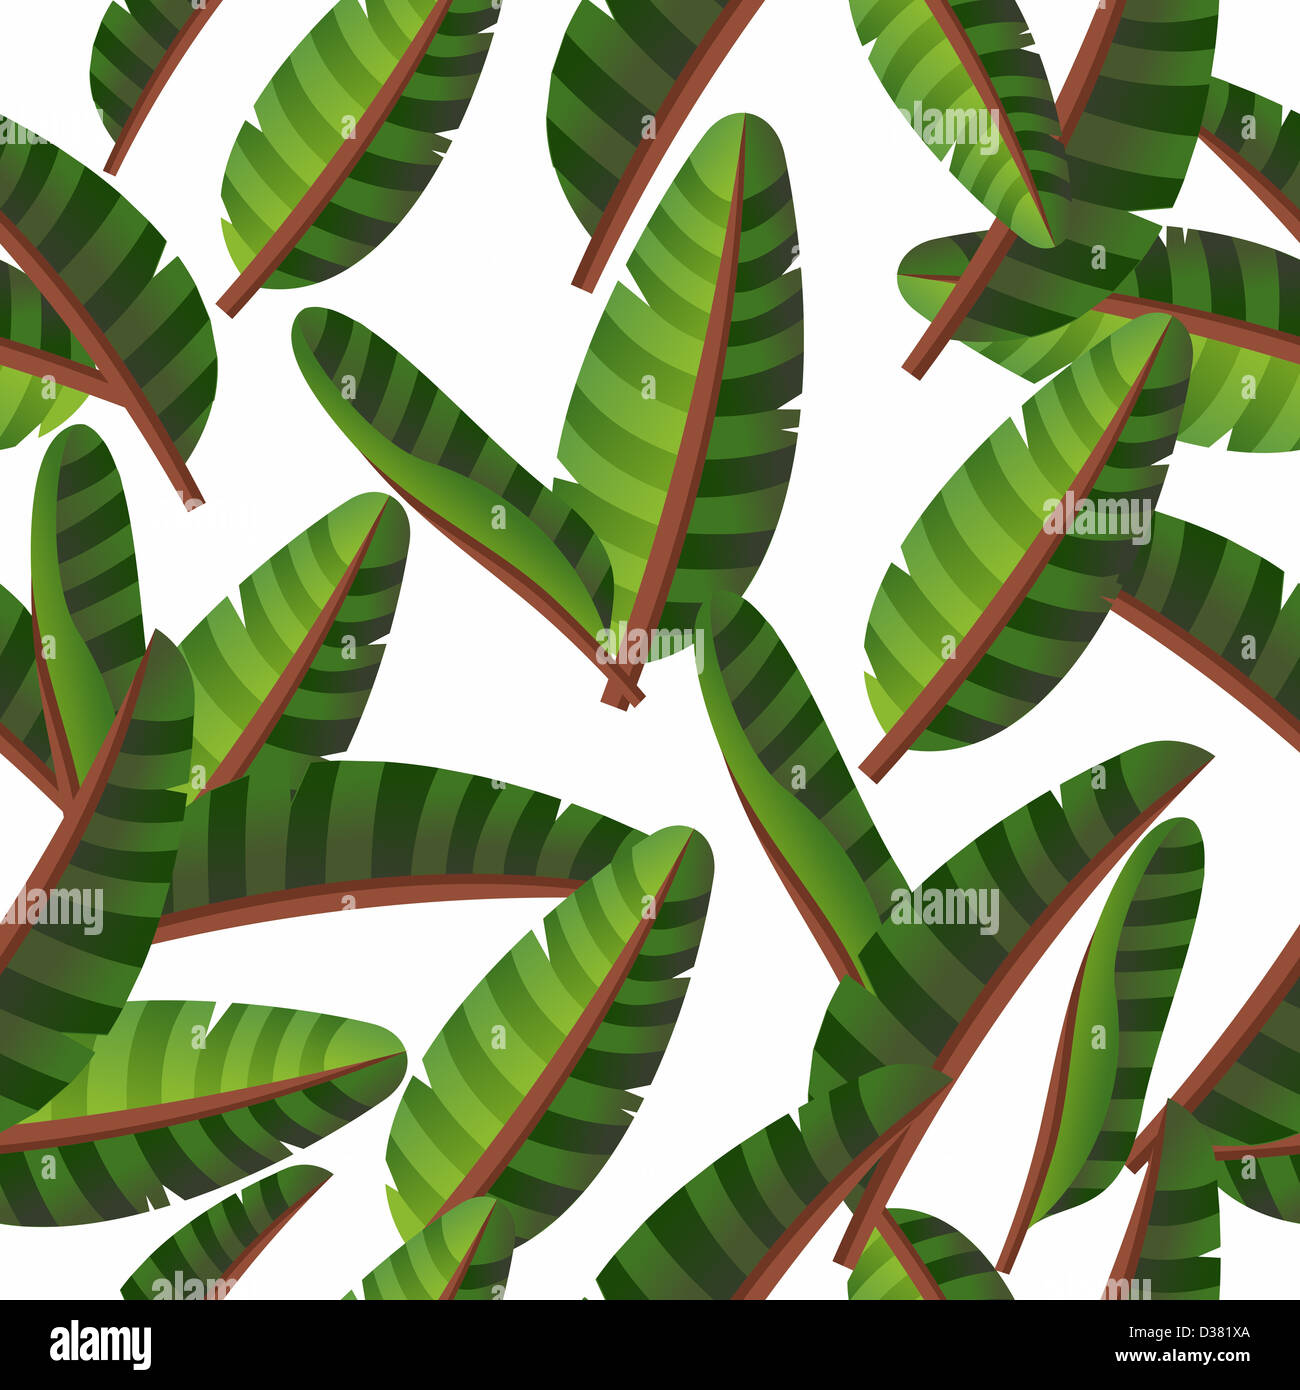 Spring tropical green leaves seamless pattern. Vector file layered for easy manipulation and custom coloring. Stock Photo